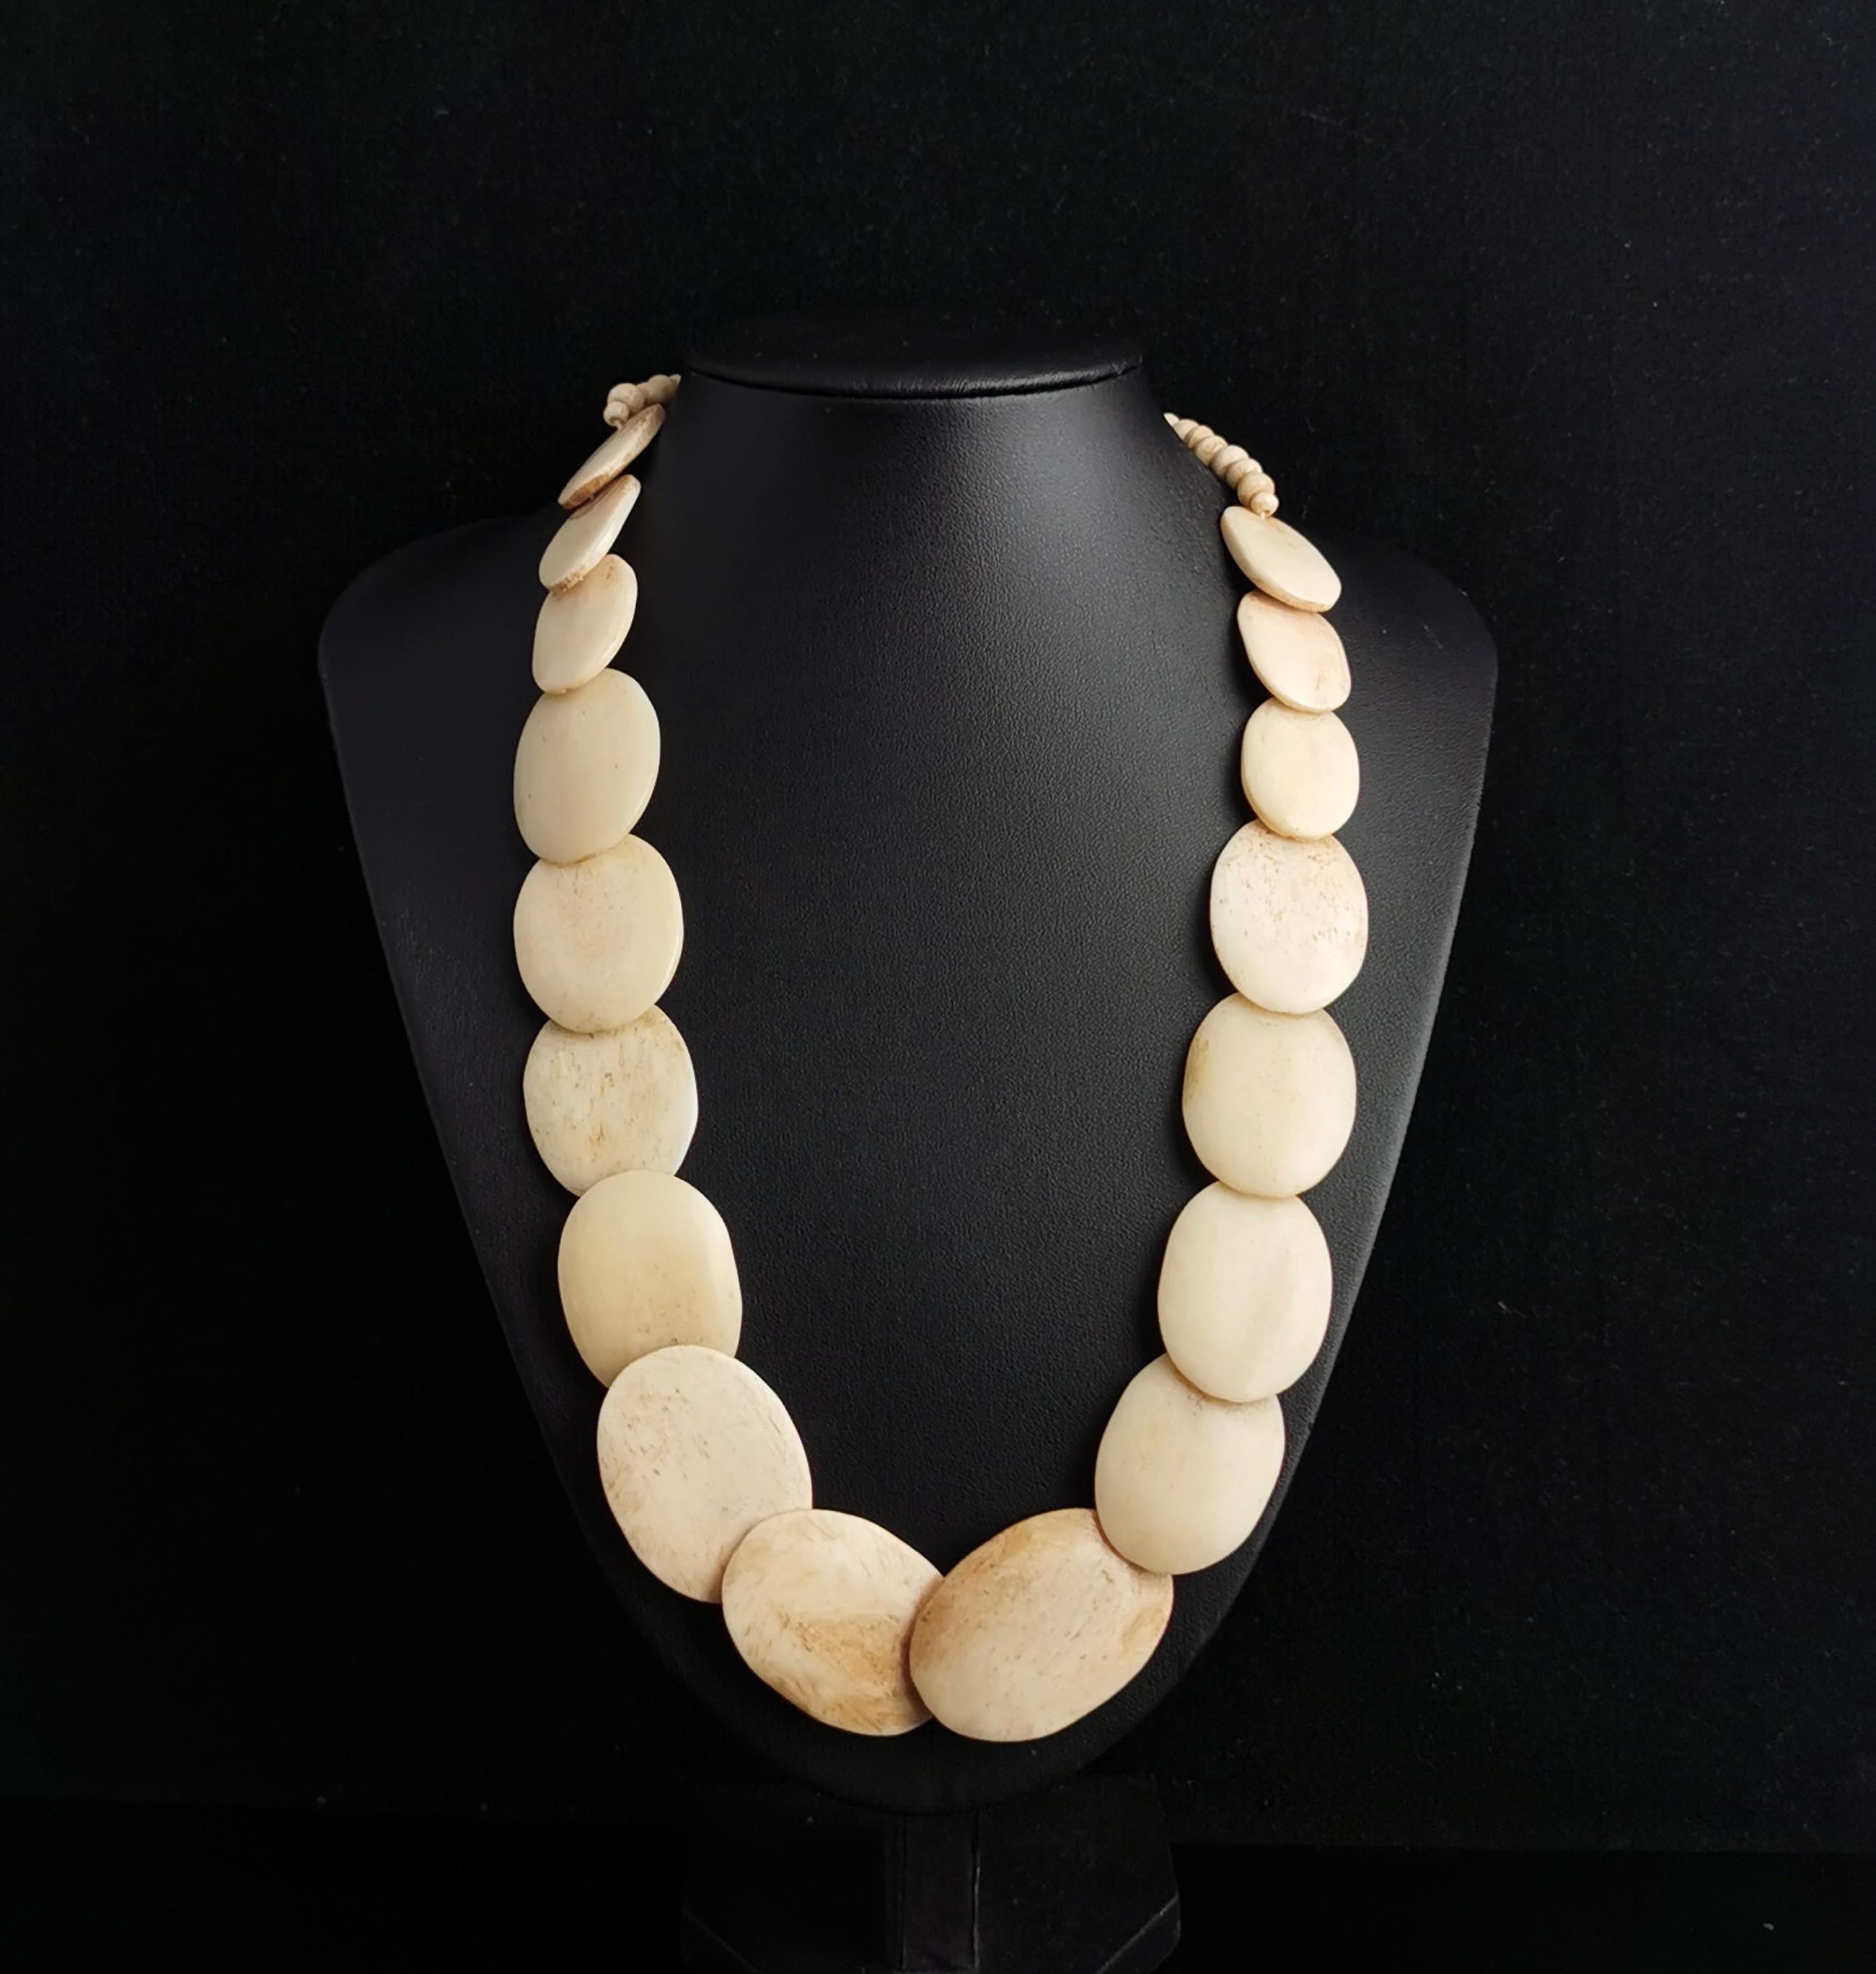 An interesting chunky antique Victorian bovine bone necklace.

It has large smoothed flat oval bone links or carved beads, these overlap each other slightly to make a collar type necklace.

The ends of the necklace has round carved bone beads and